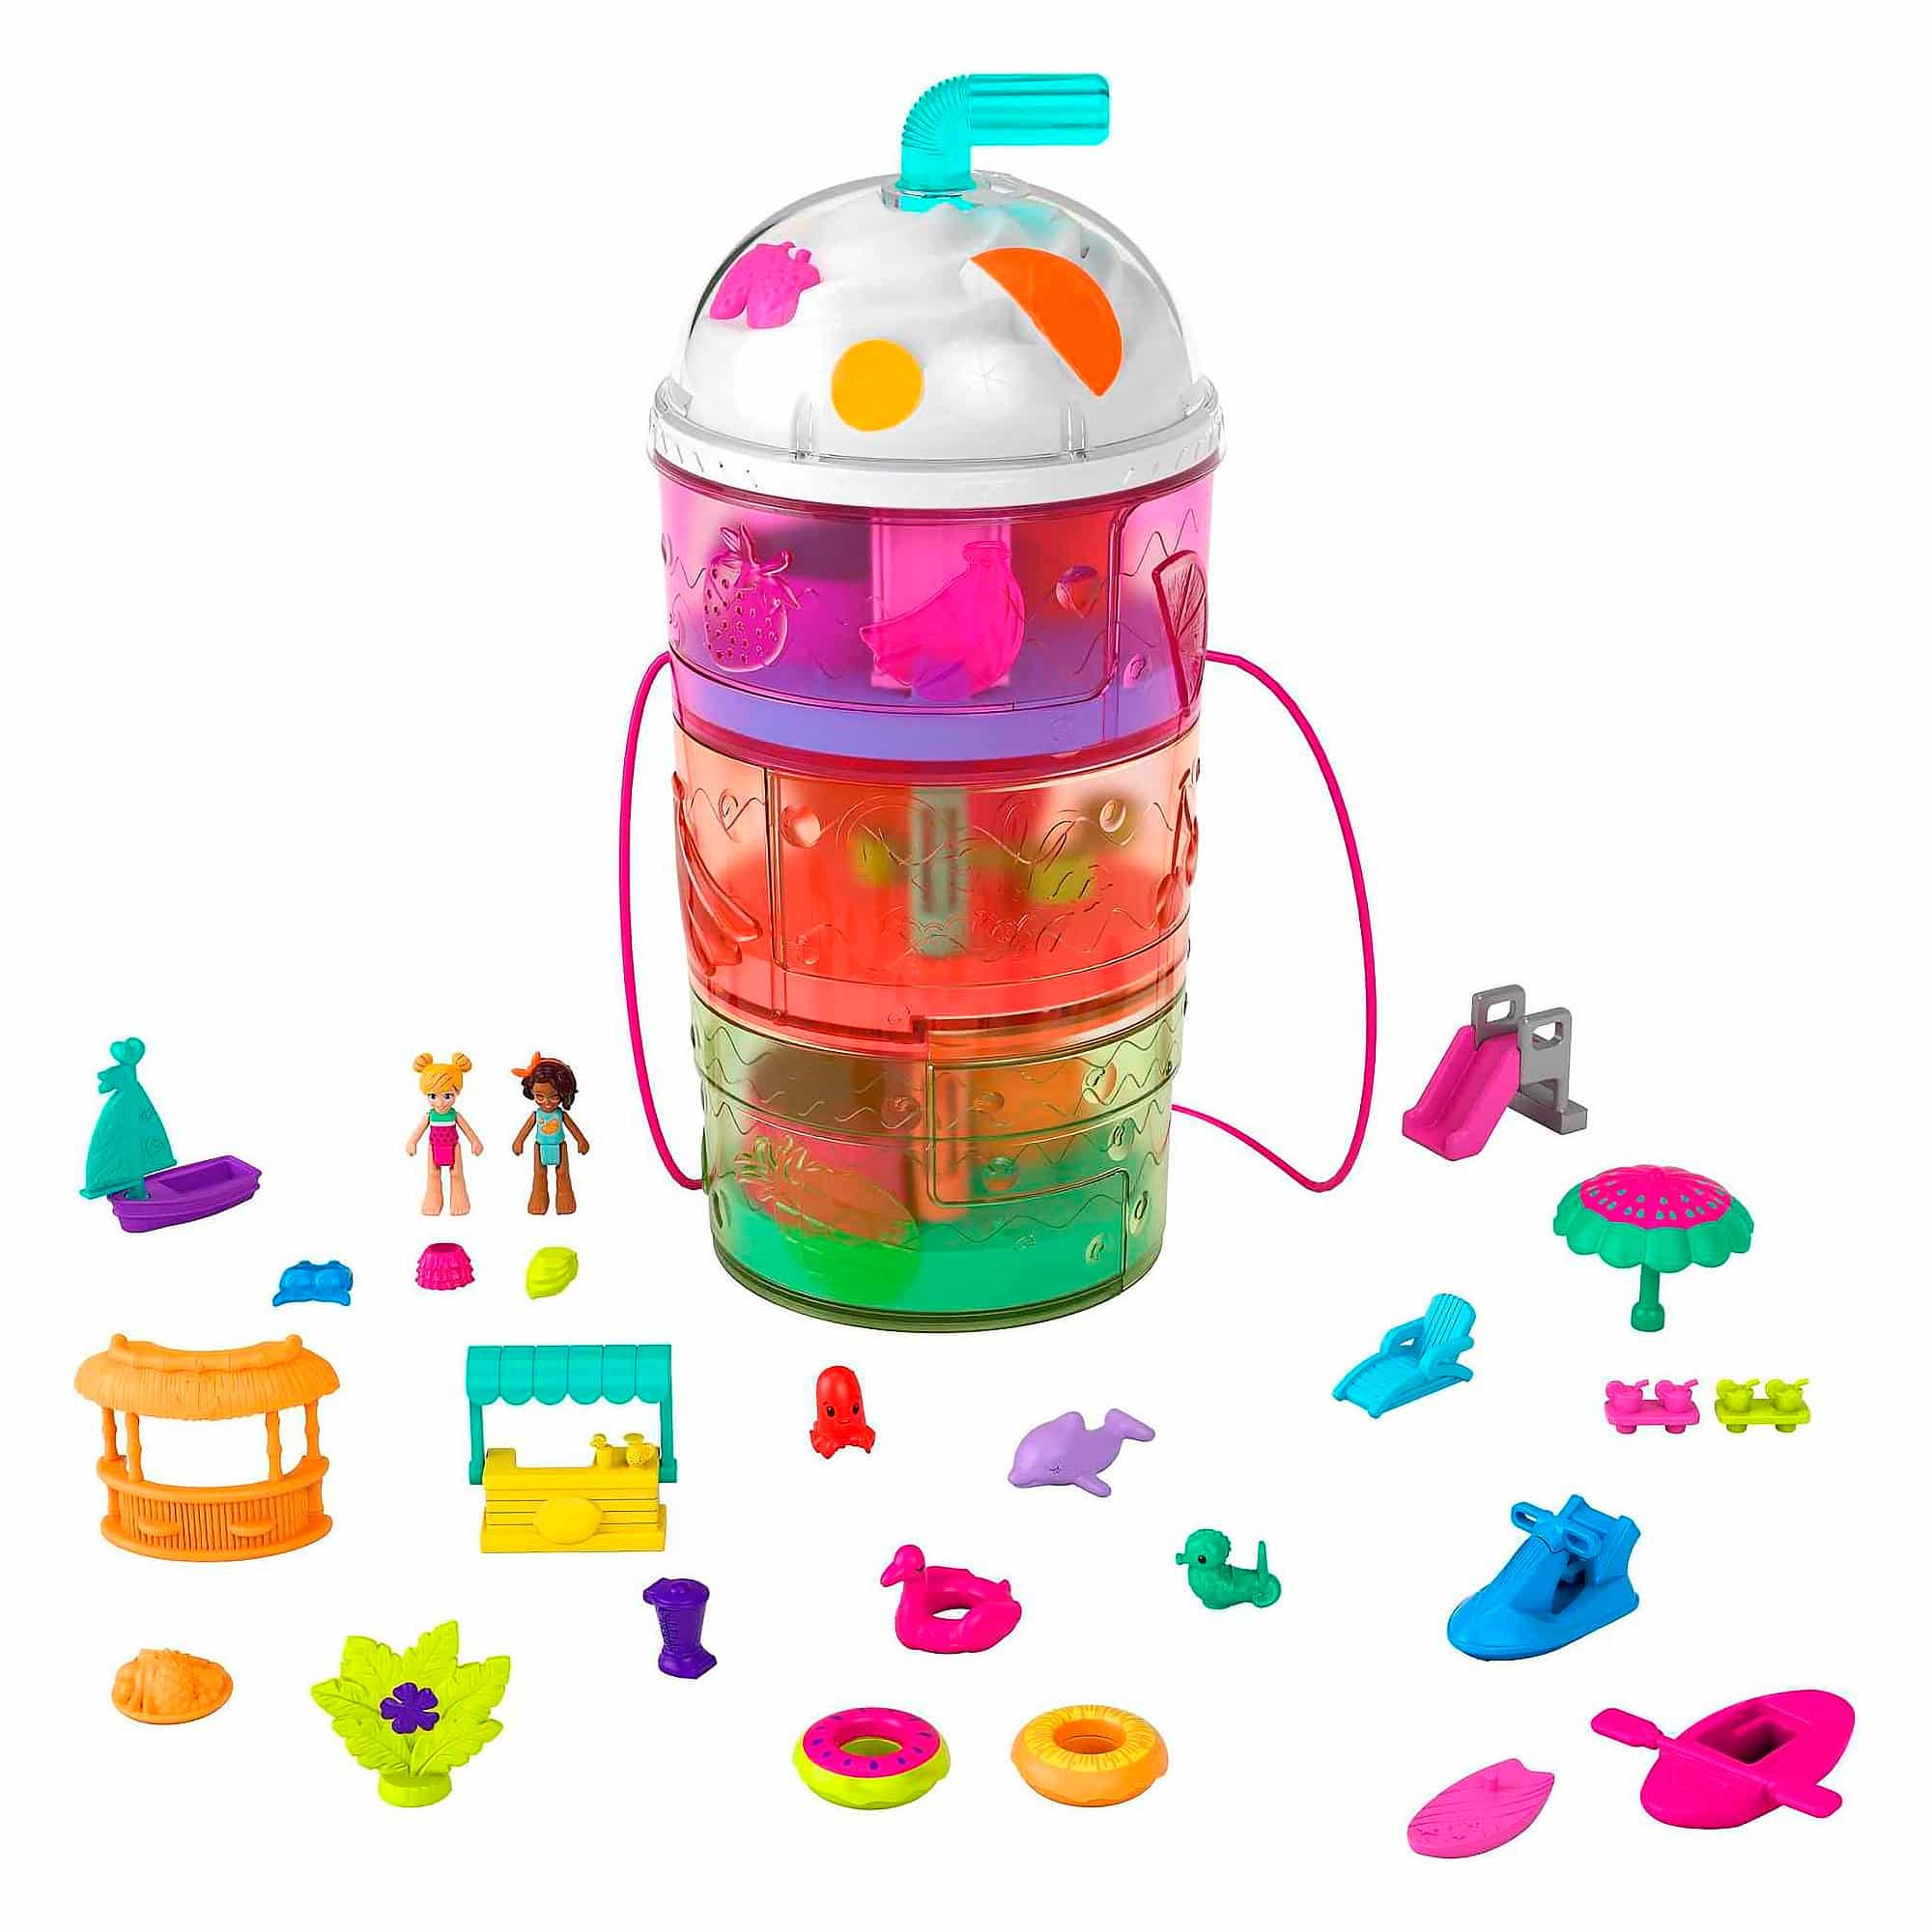 Polly Pocket - Spin 'N Surprise Assortment